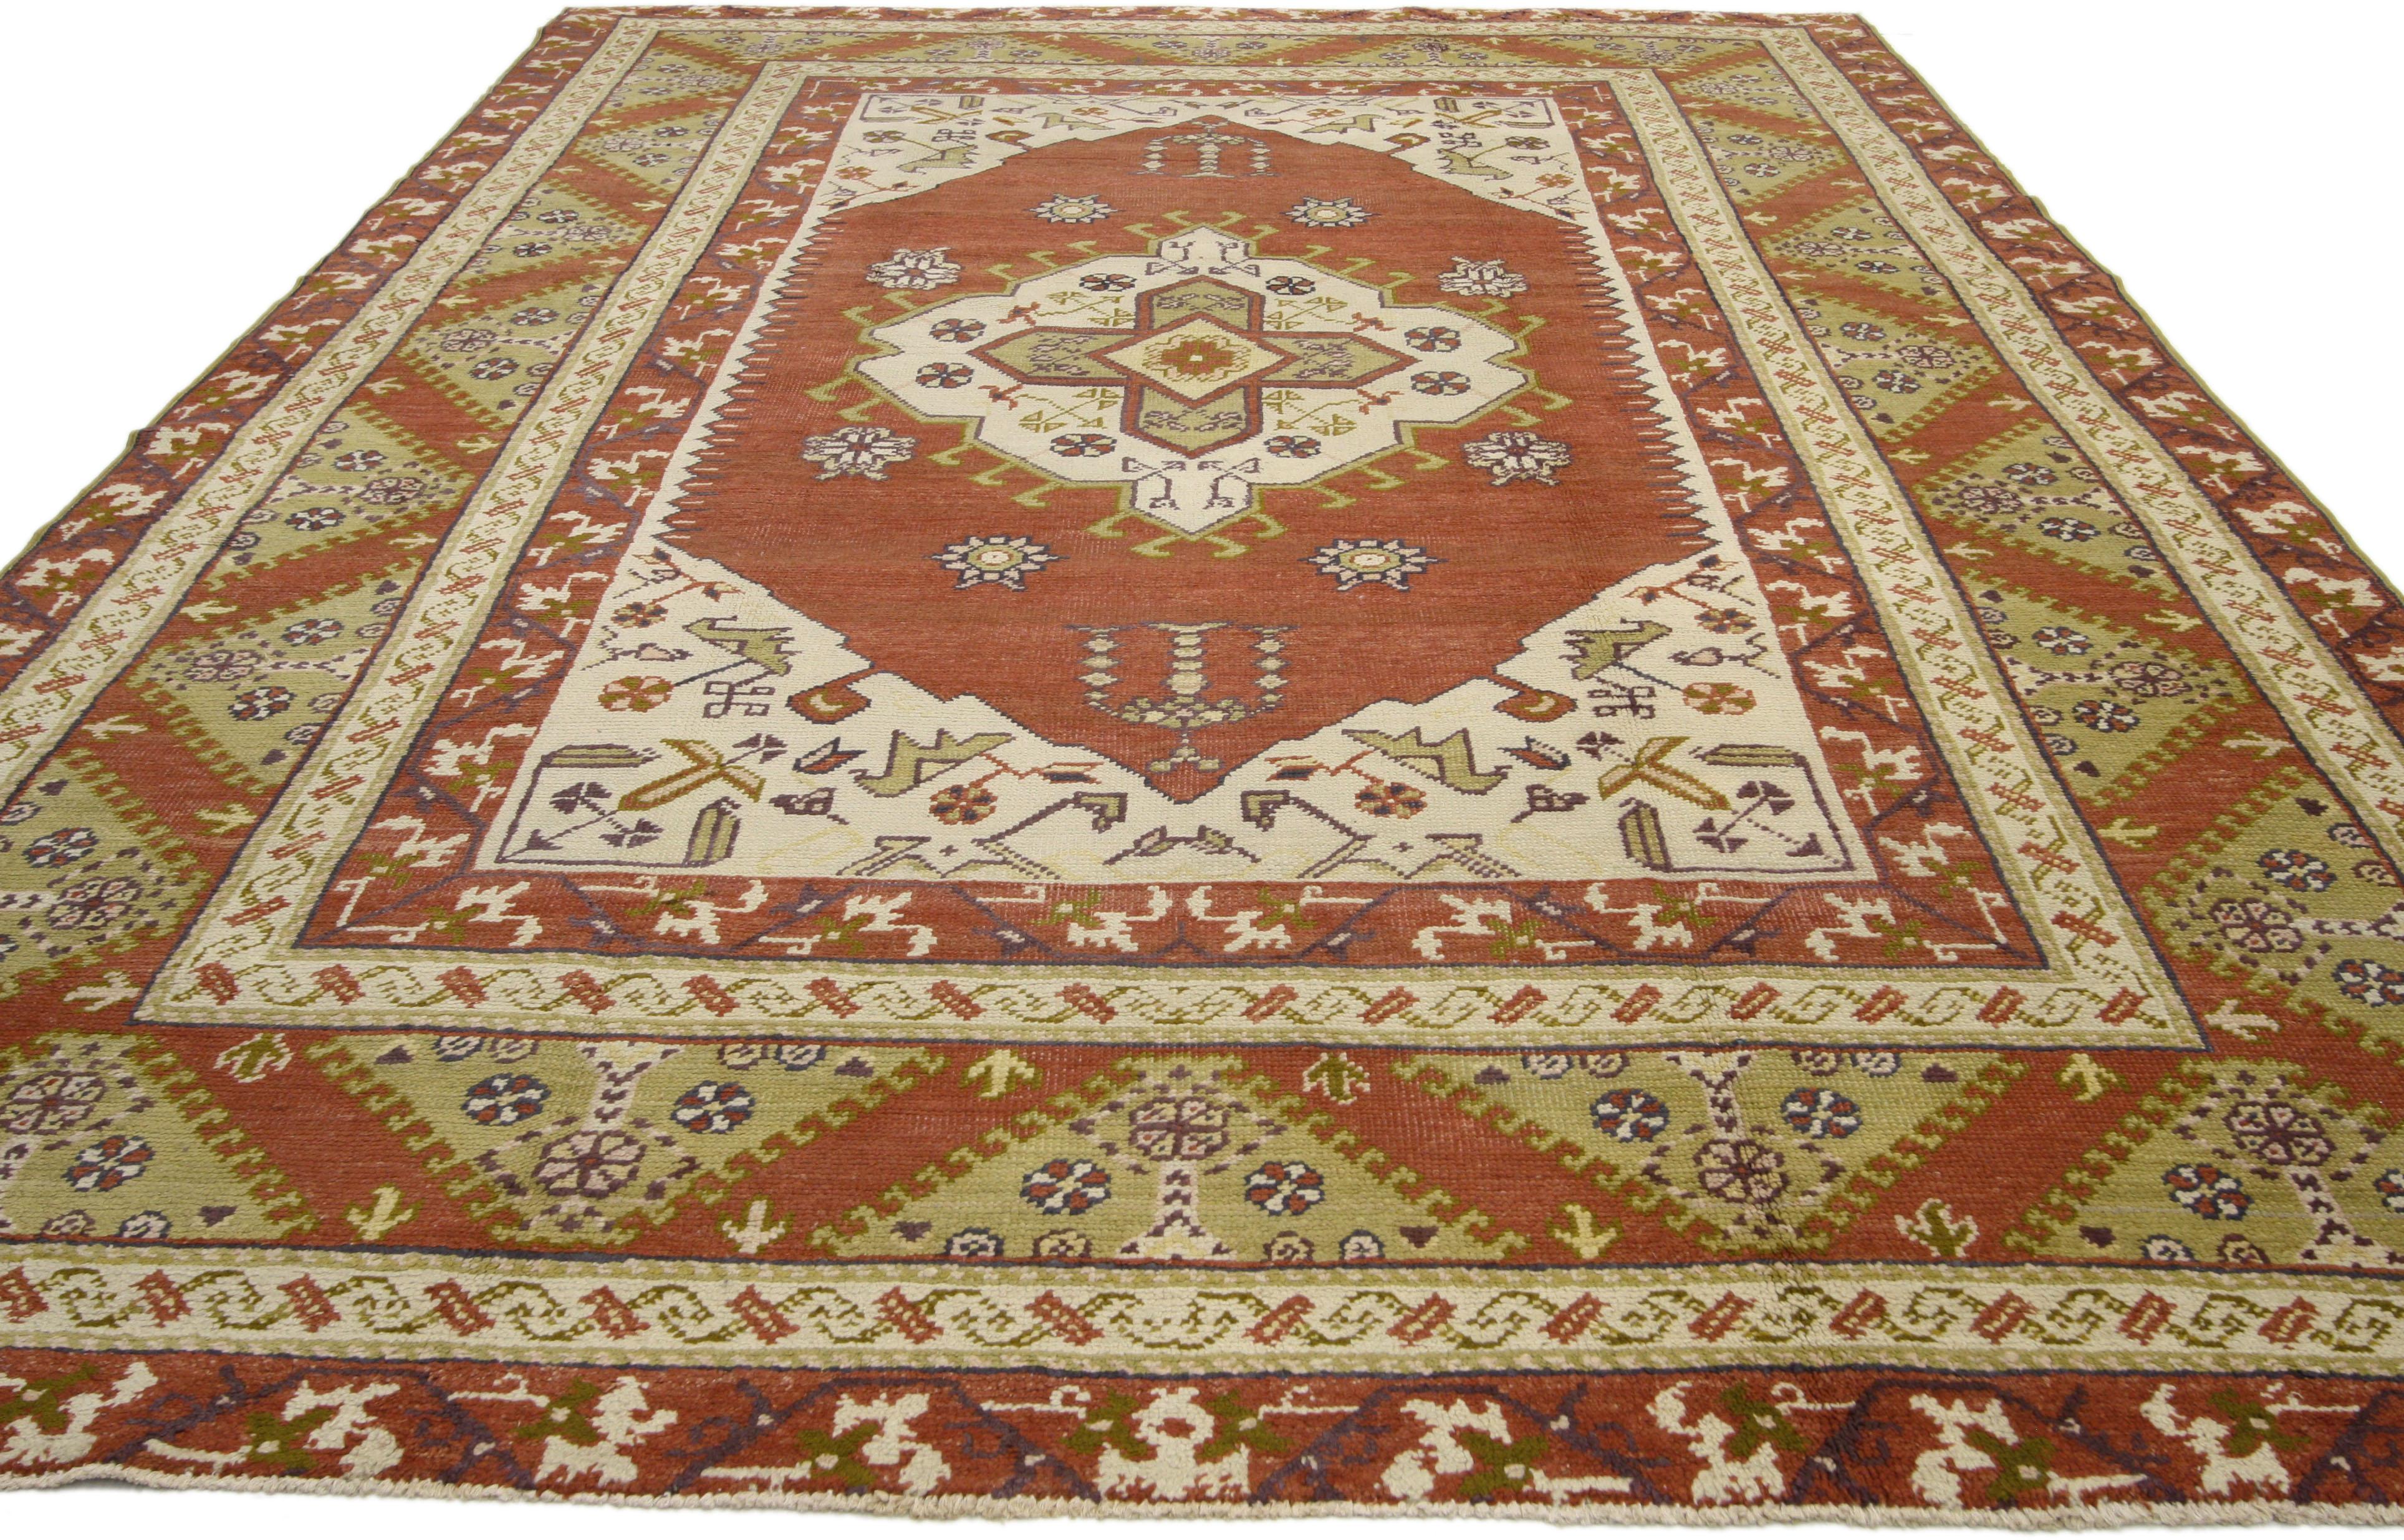 72489 vintage Turkish Oushak rug with Tribal Artisan style. This hand knotted wool vintage Turkish Oushak rug embodies an Artisan style. Immersed in Anatolian history and warm colors, this vintage Oushak rug features a center medallion filled with a